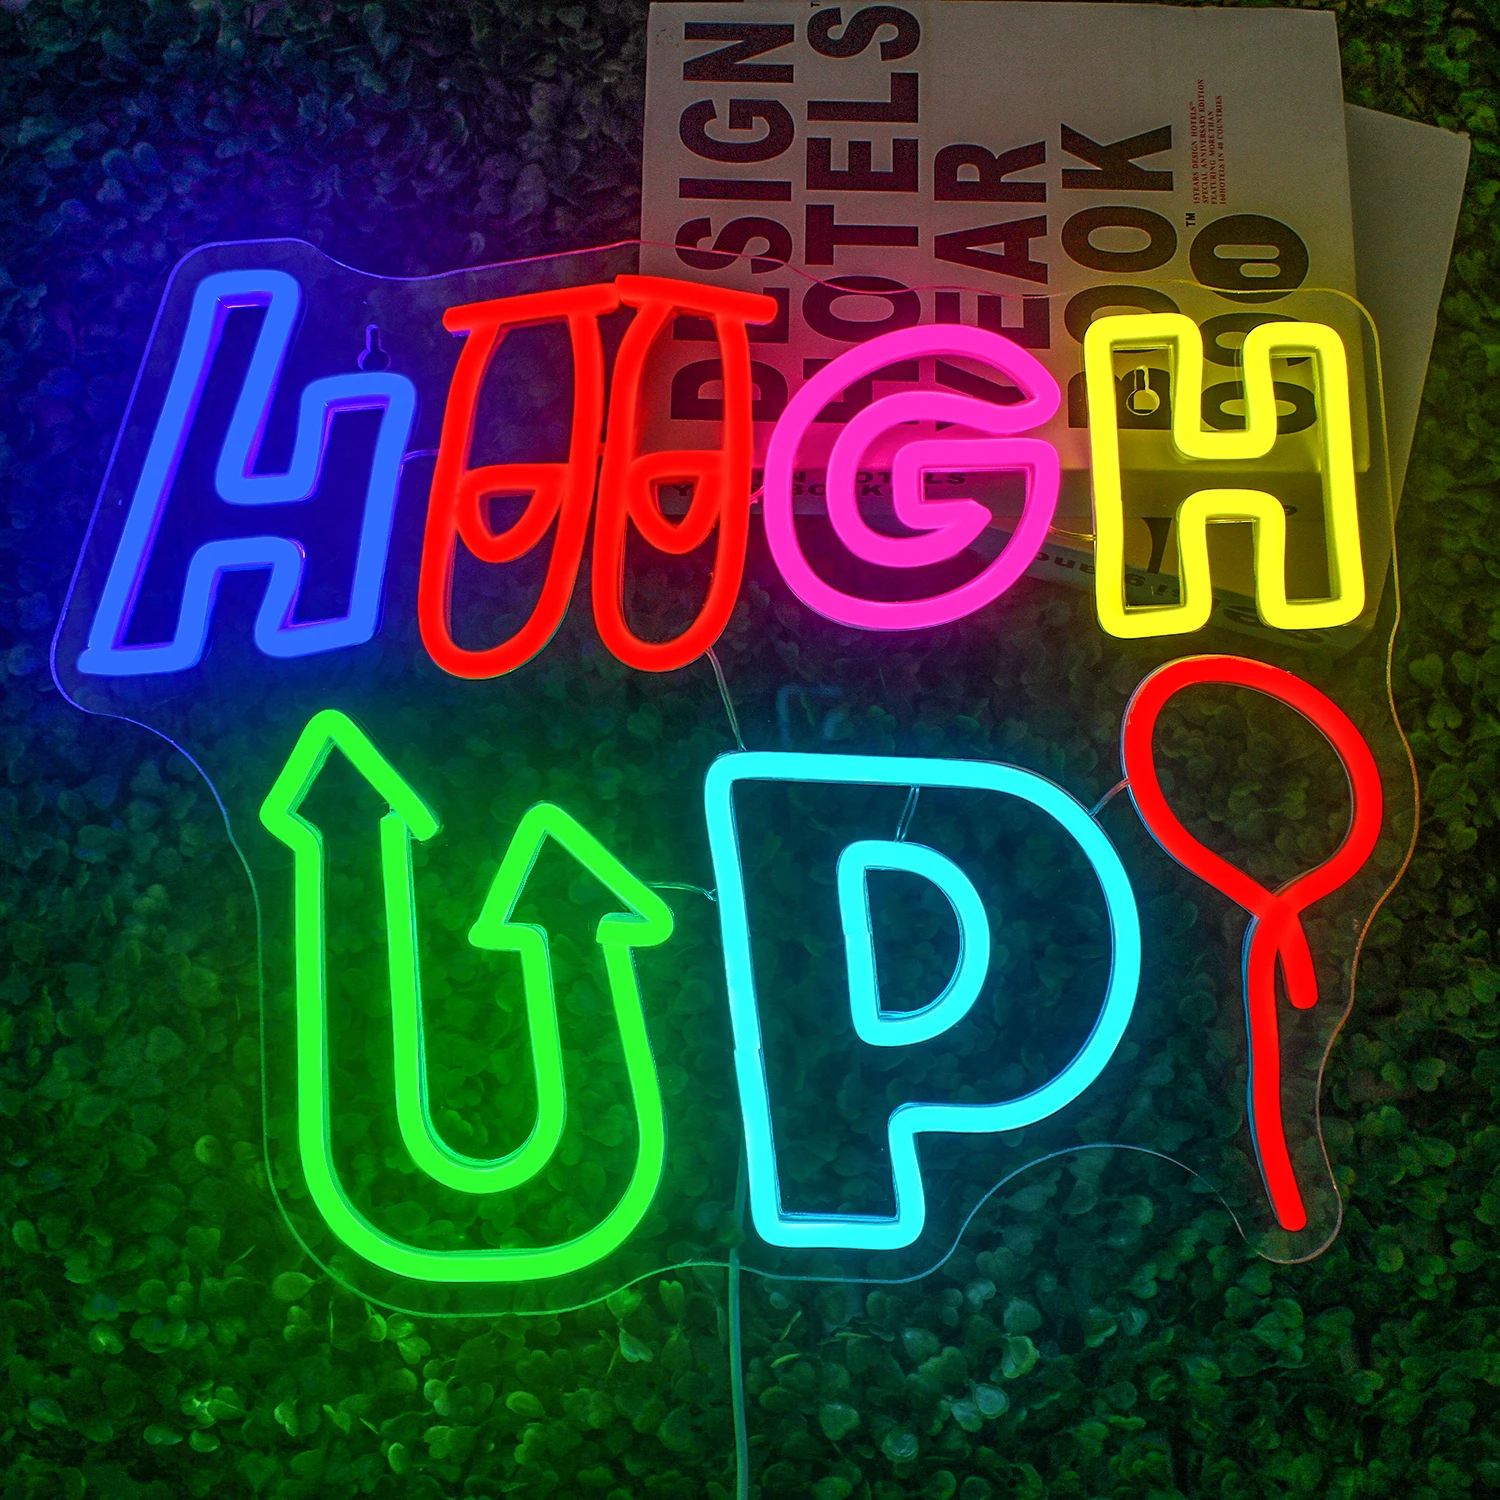 

High Up Colorful Neon Sighs Light Dimmable Inspire Hanging Party Bar Wall Room Decoration USB Powered Super Birght Panel Lights